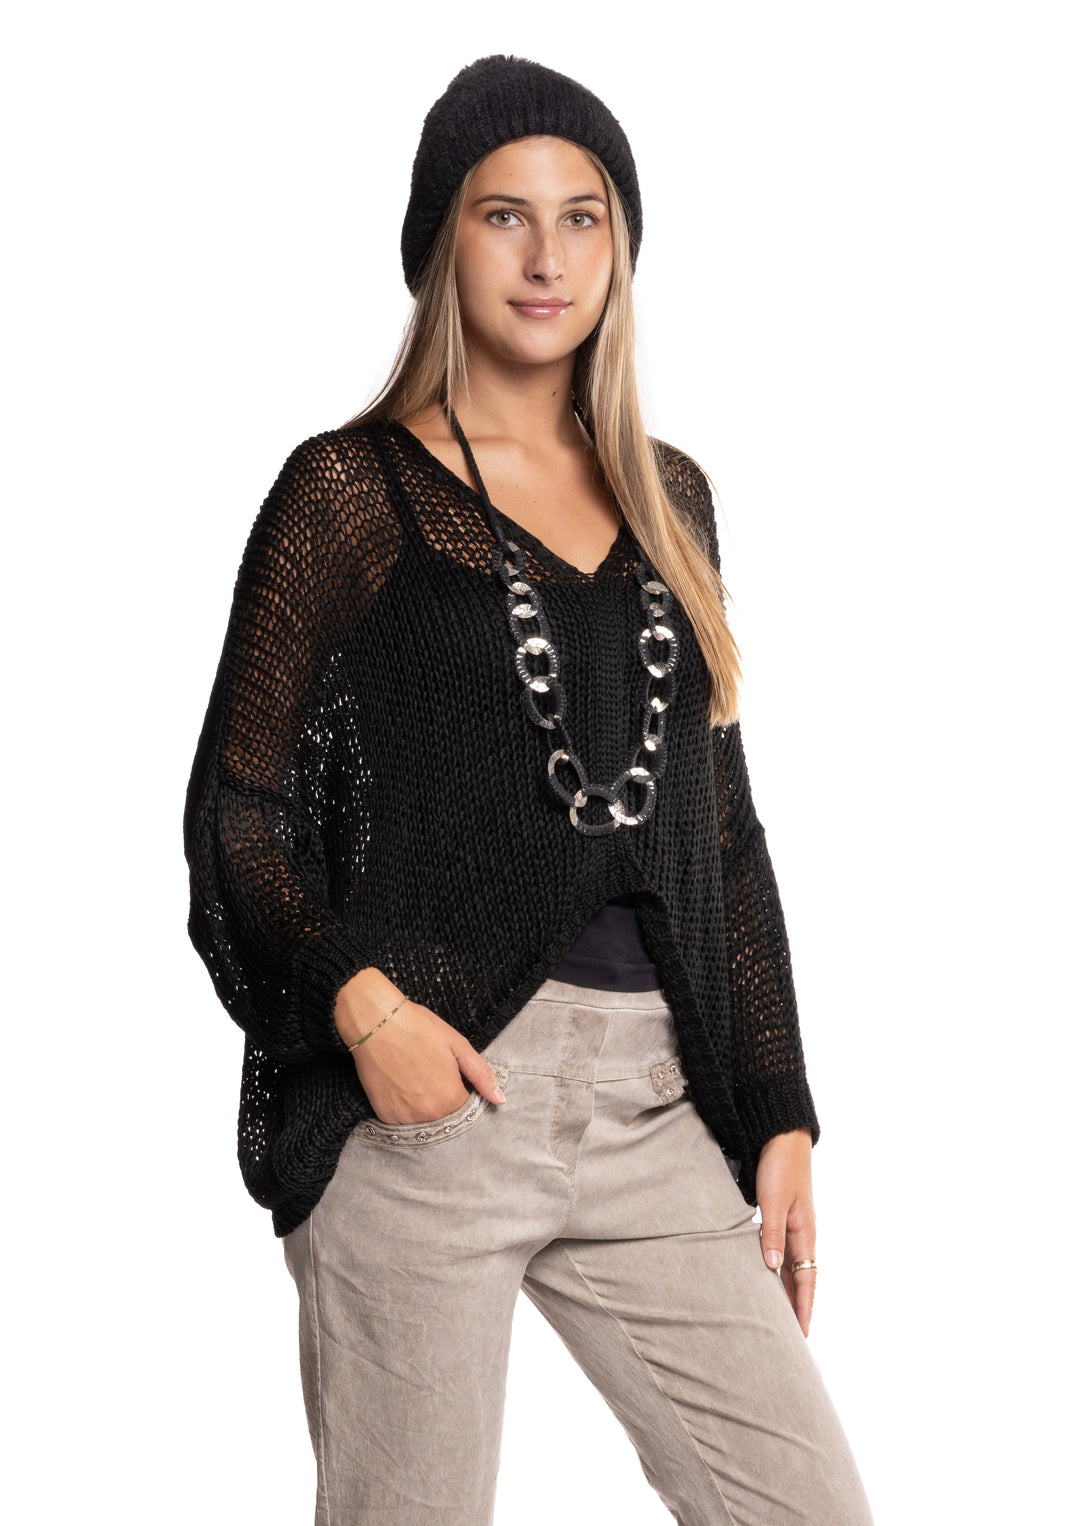 Tibby Knit Top in Onyx - Imagine Fashion